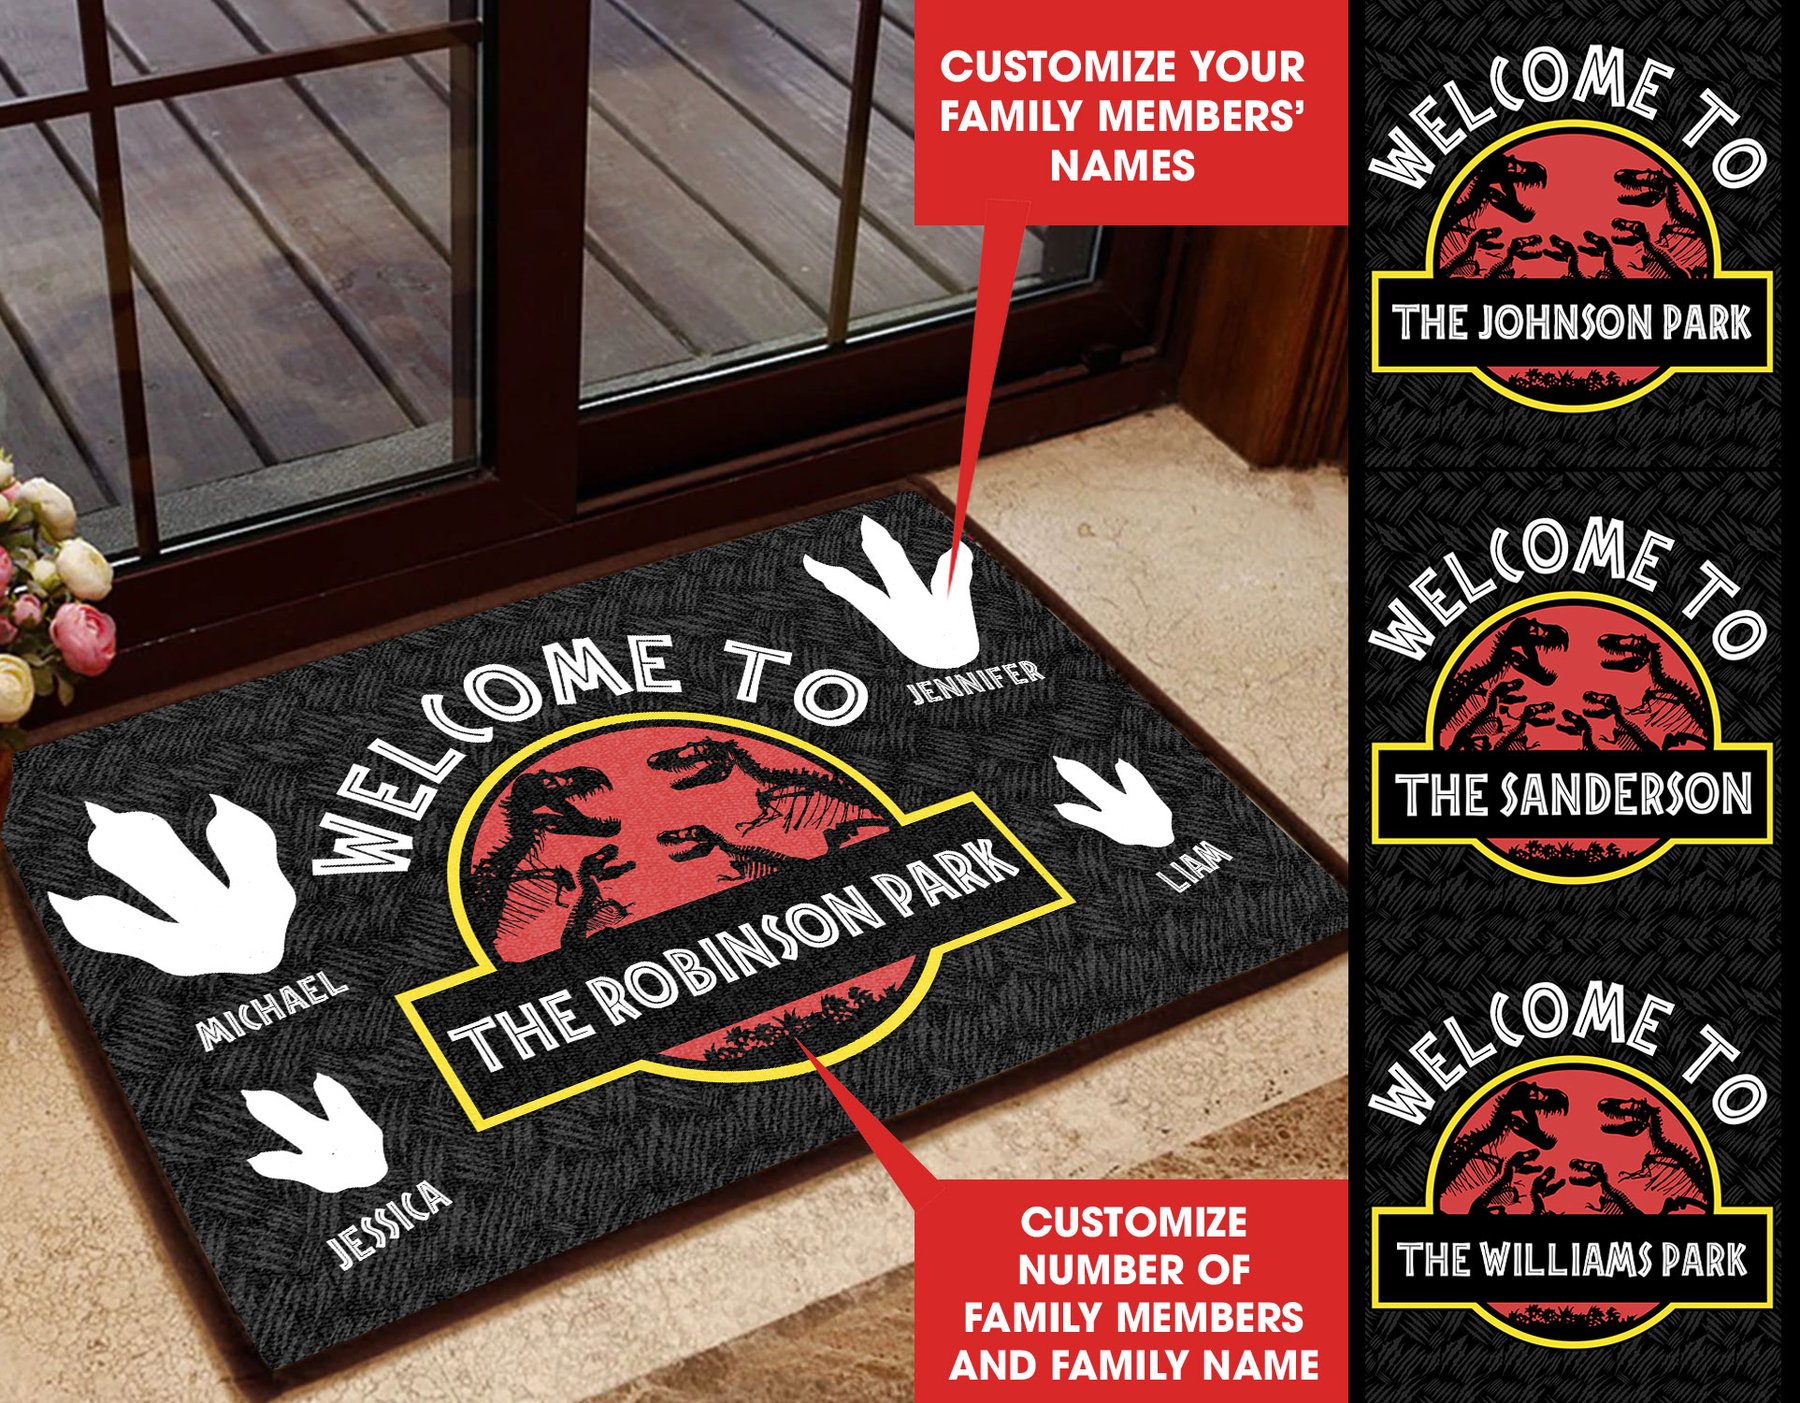 Welcome to Jurassic Part Personalized custom doormat